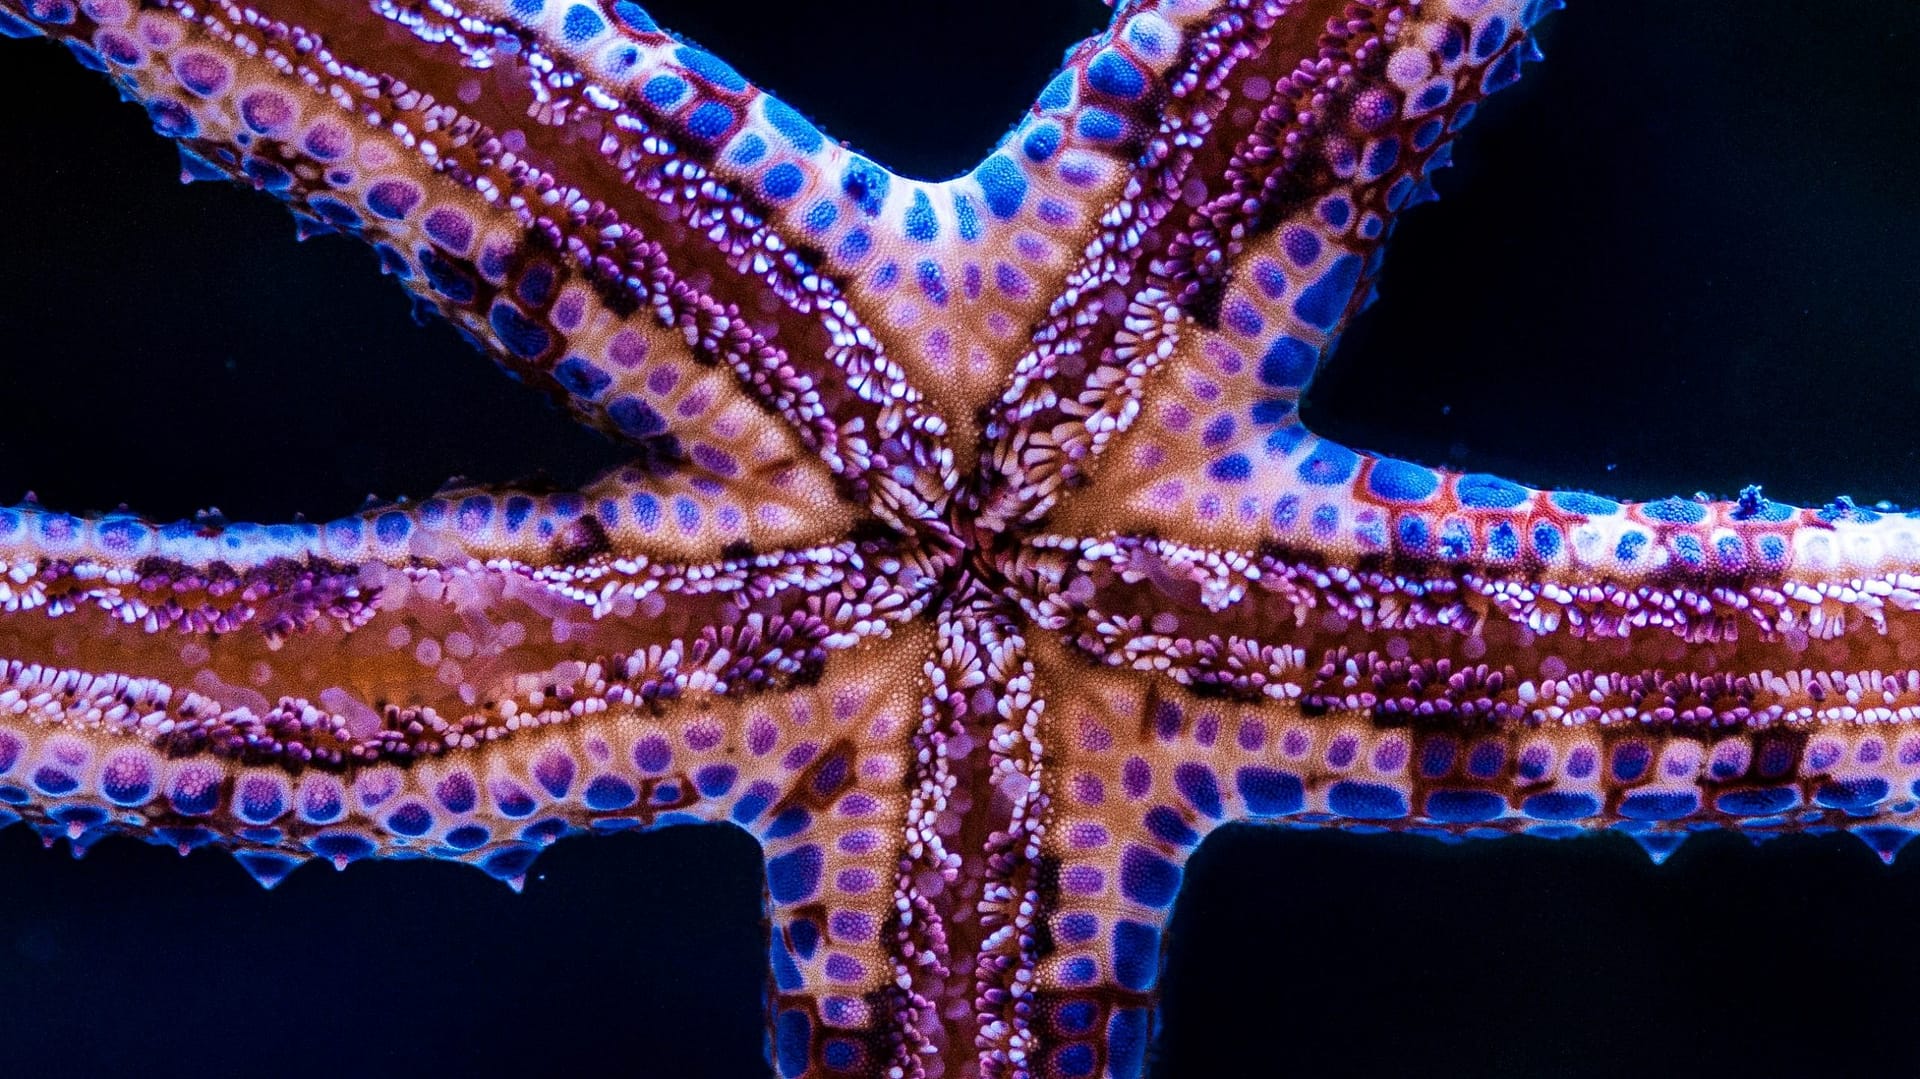 The Strangest Legs In The Sea: Could Your Toes Out-Sniff A Starfish?